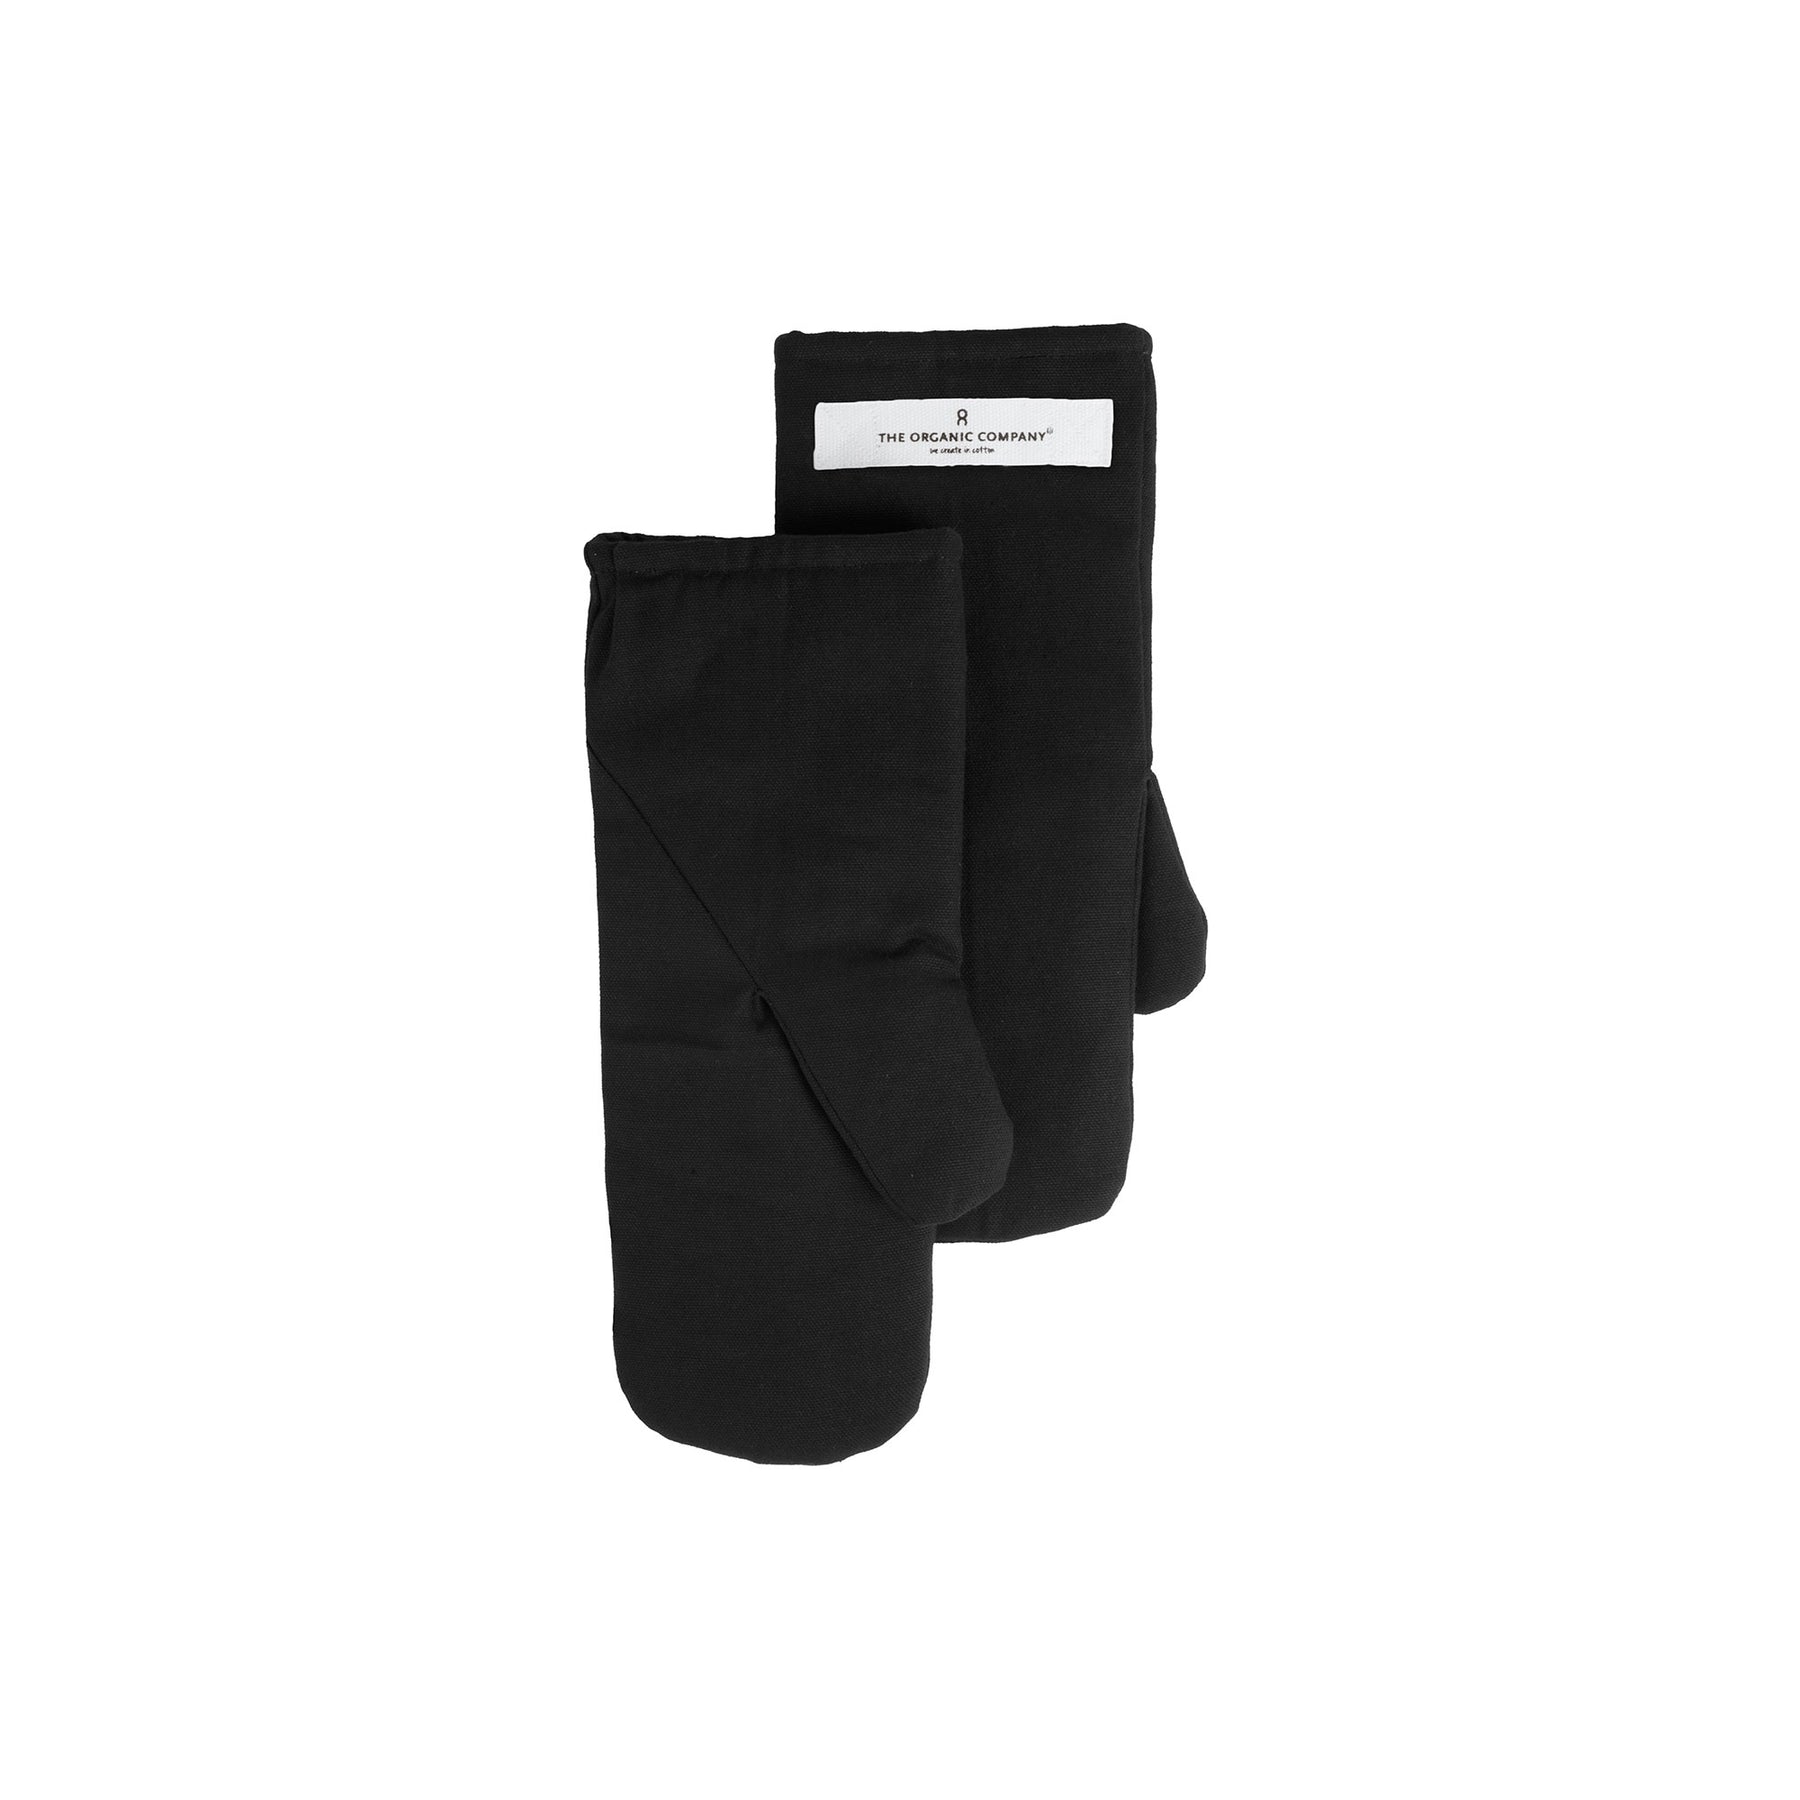 Shop Oven Mitts in multiple colors and sizes | Burke Decor